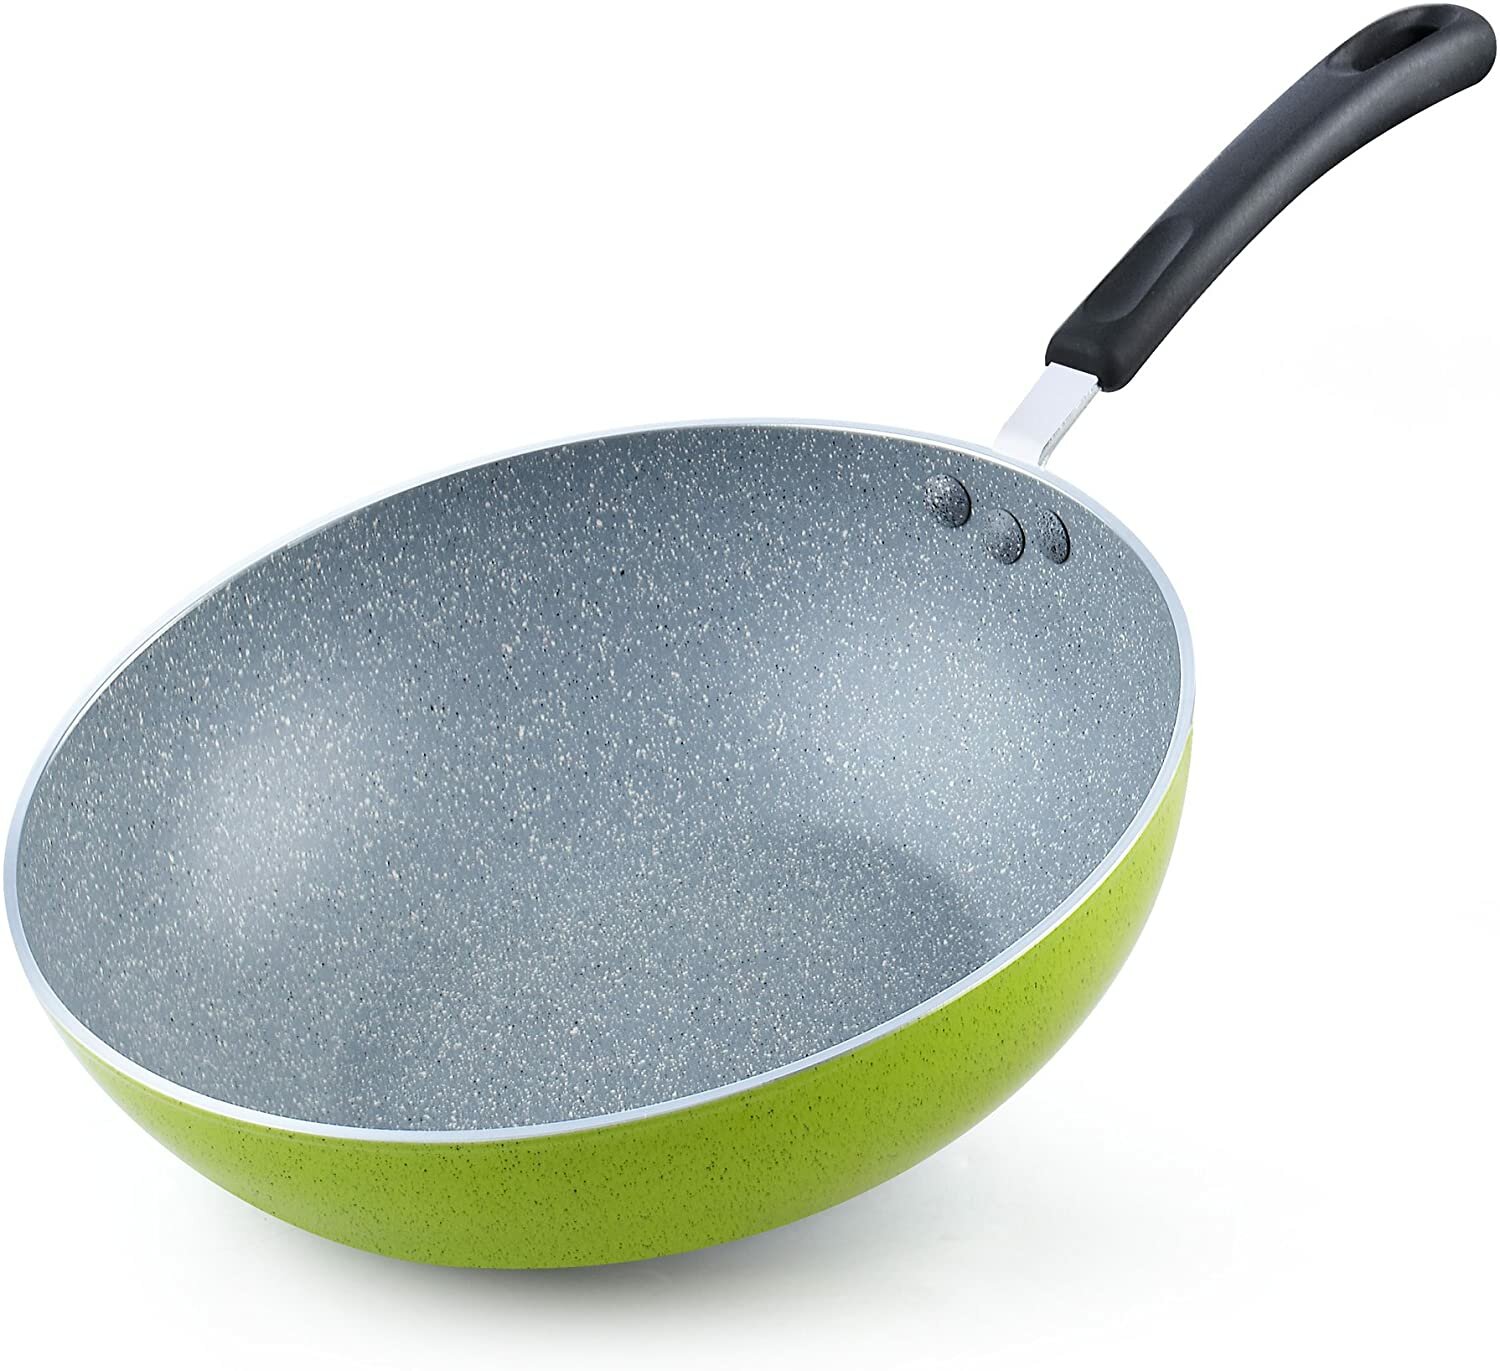 Cook N Home 12inch Frying Pan With Non-stick Coating Induction Large Kitchen for sale online 